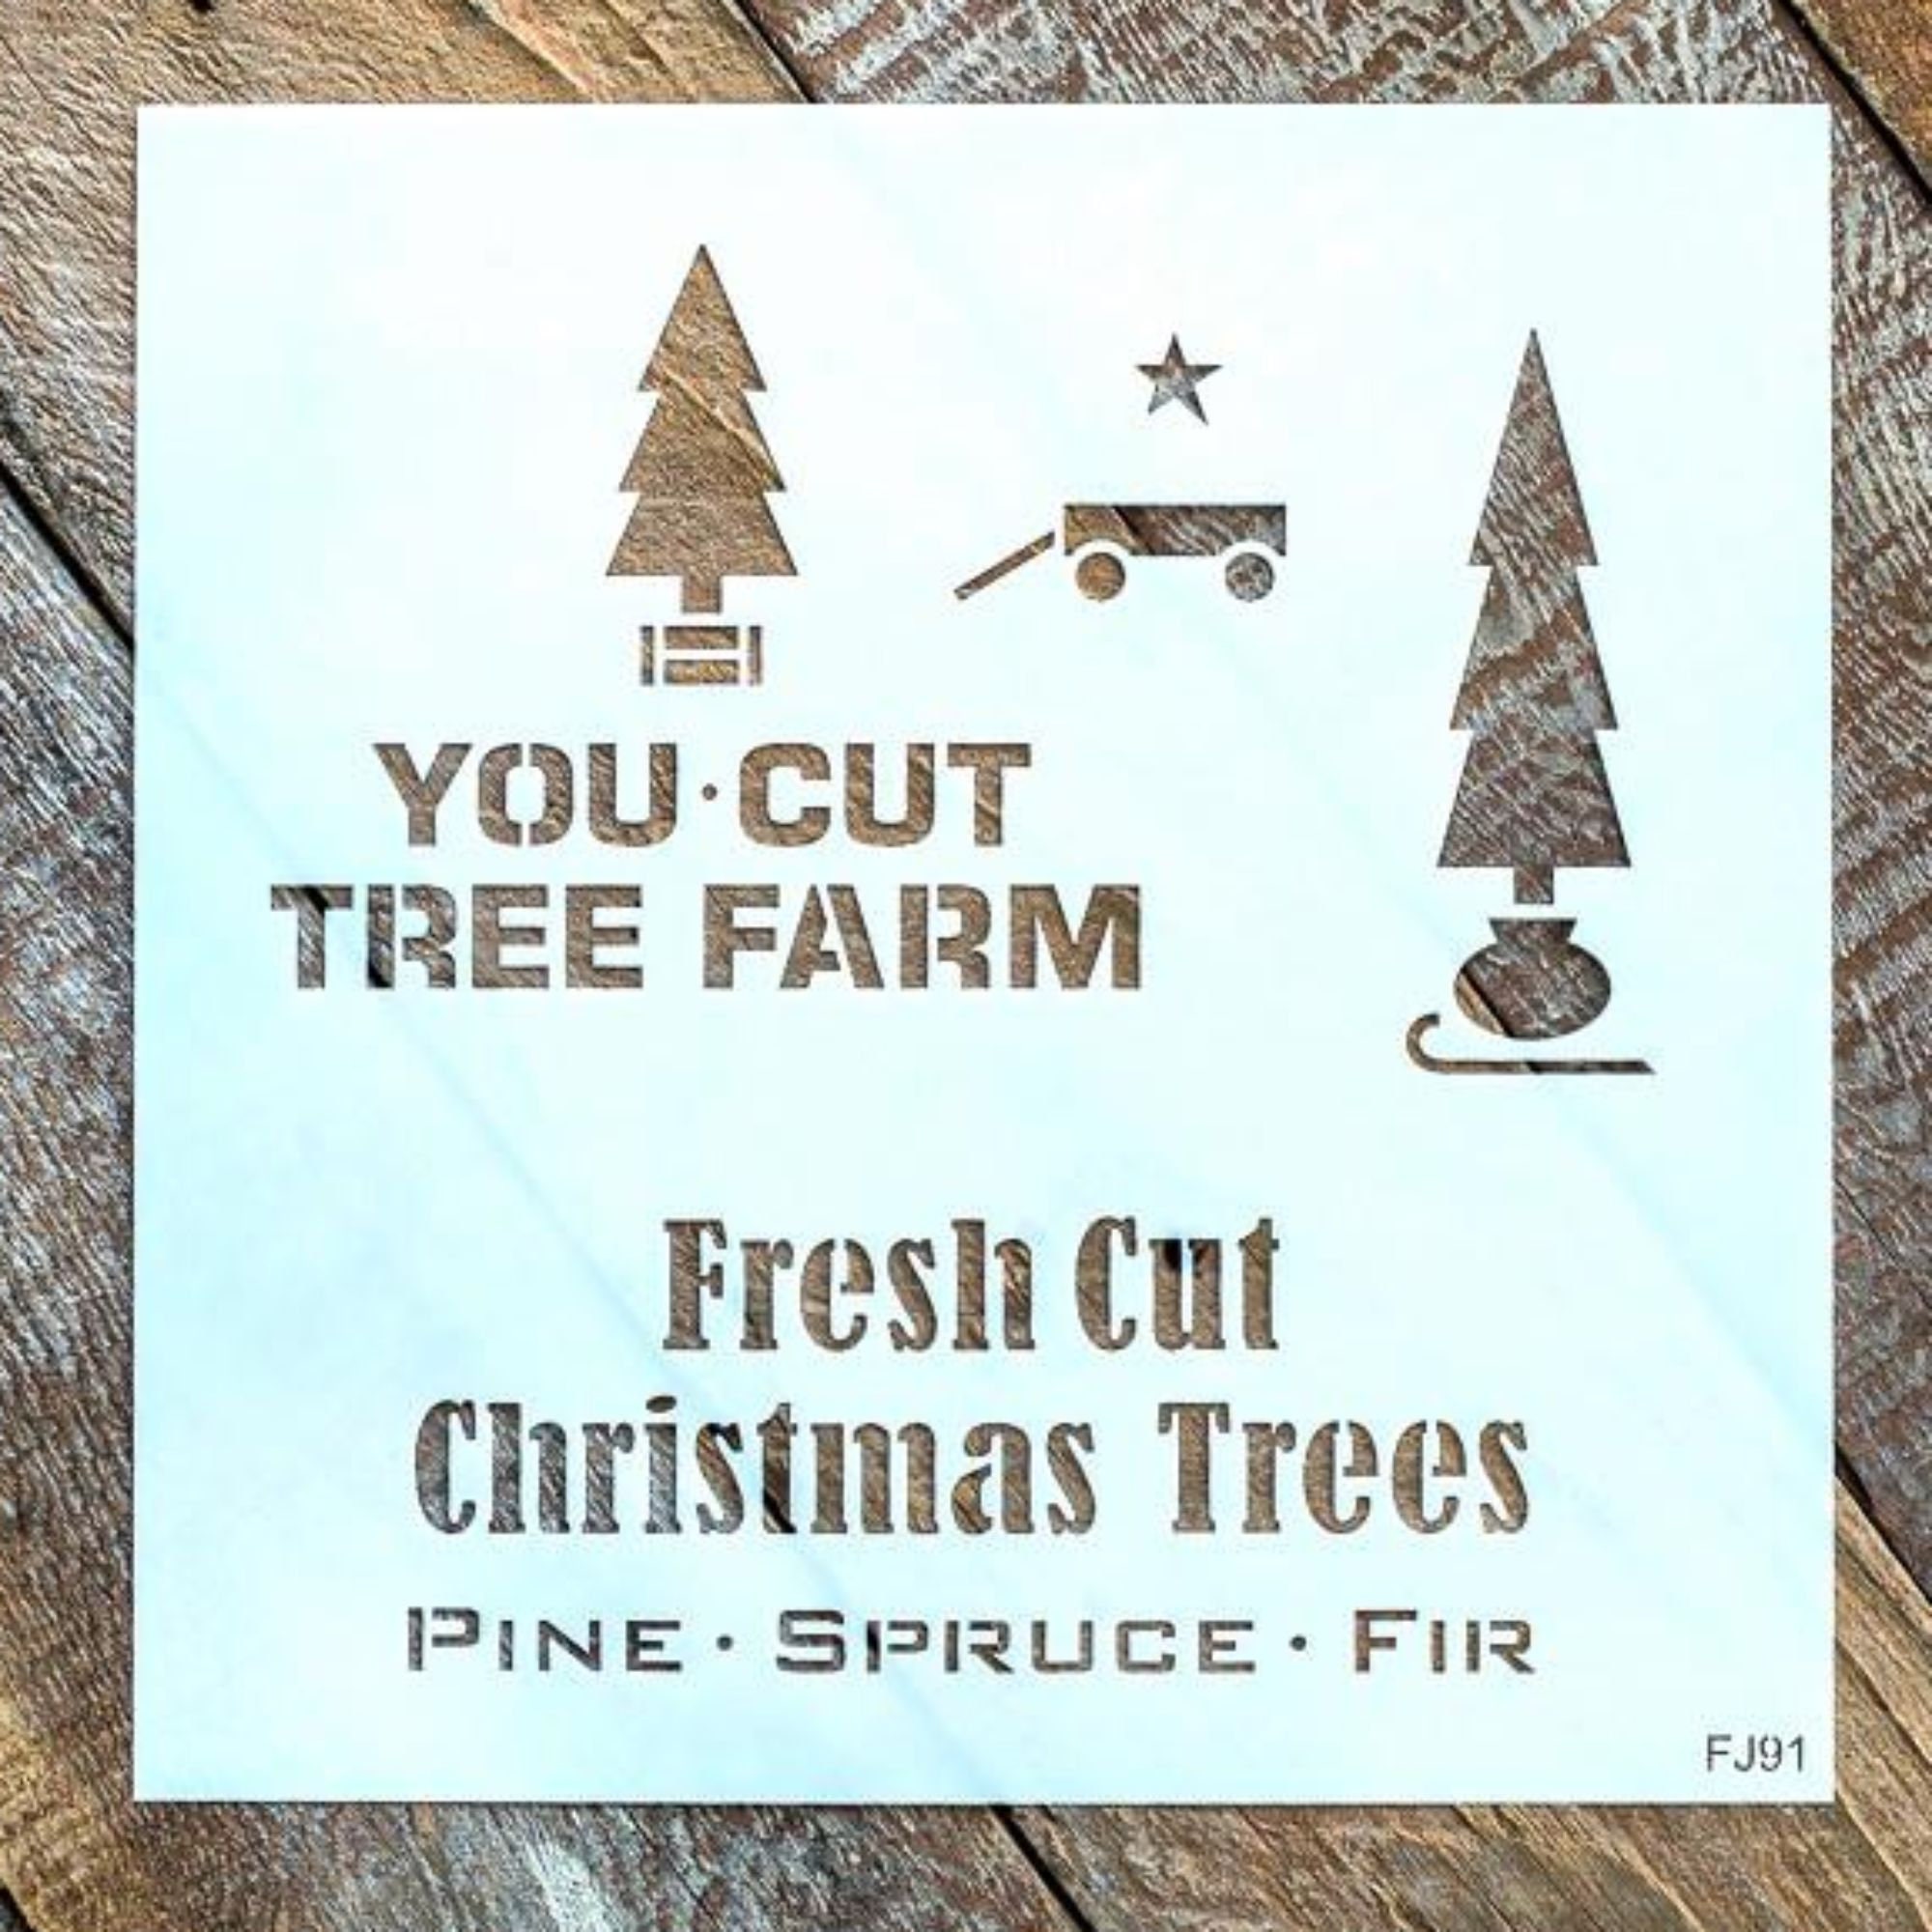 Tall Christmas Tree in Crate stencil by Funky Junk's Old Sign Stencils